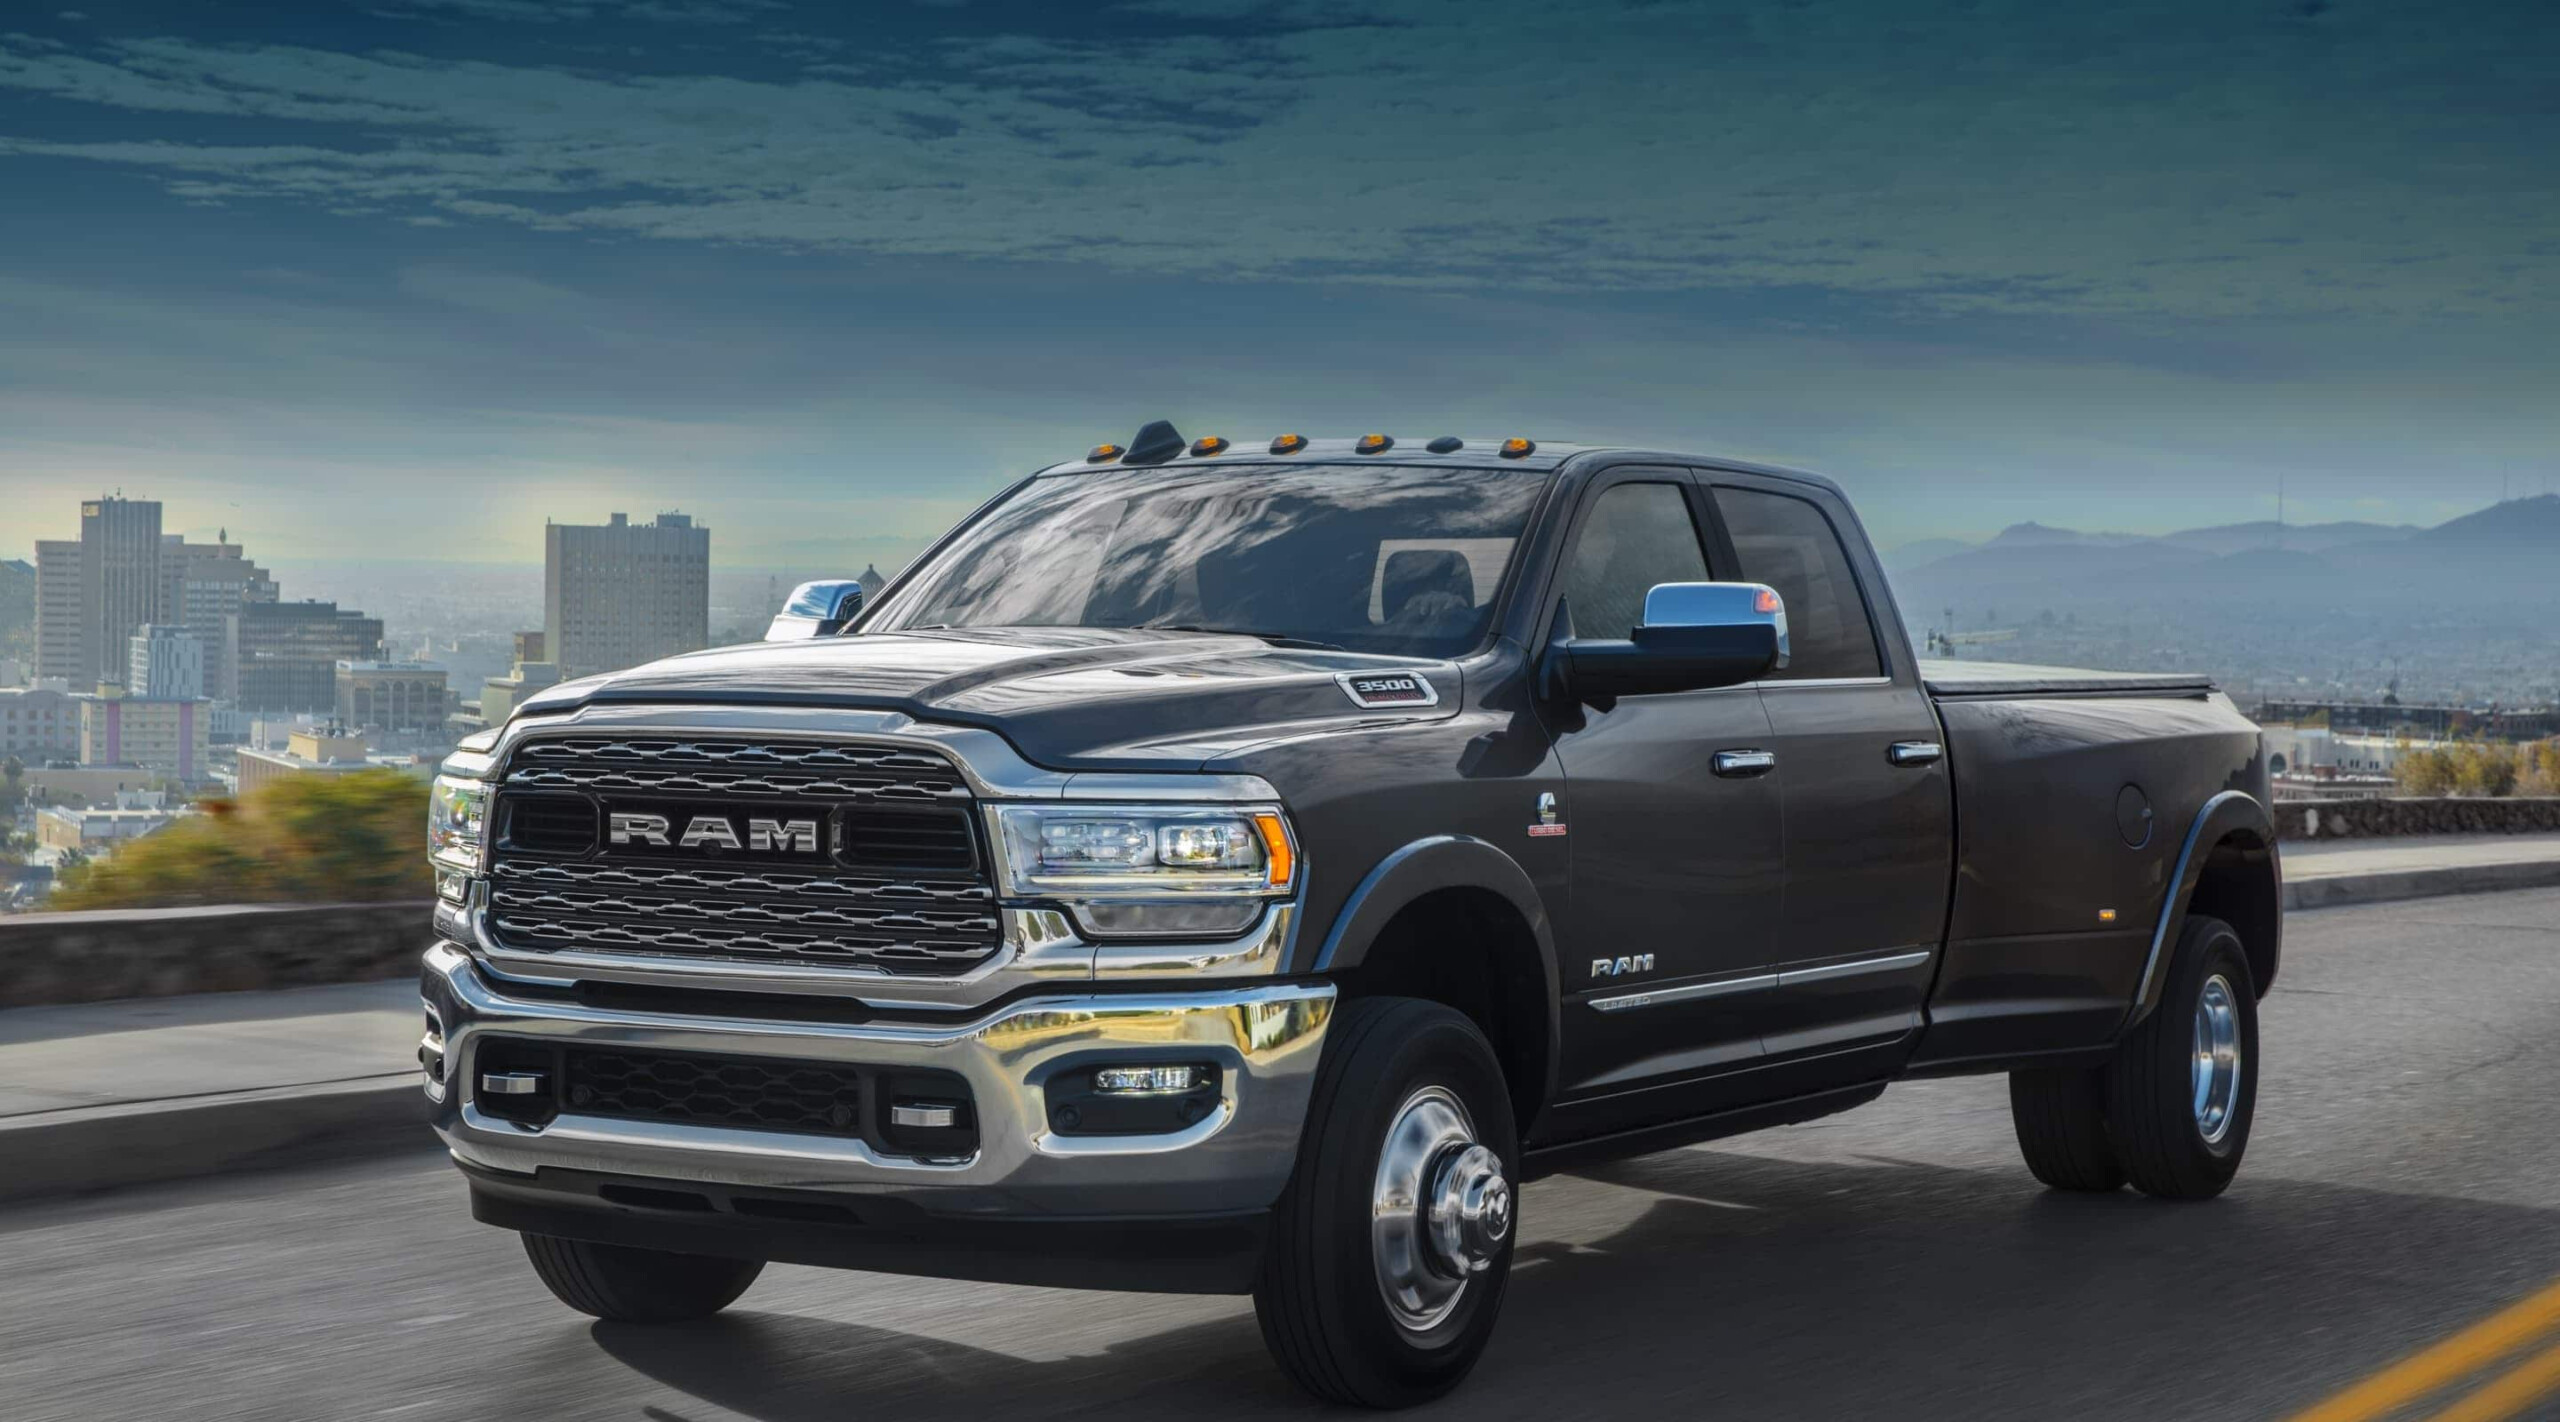 HAVE THE NICEST TRUCK - 2020 Ram 2500 Wiring Diagram